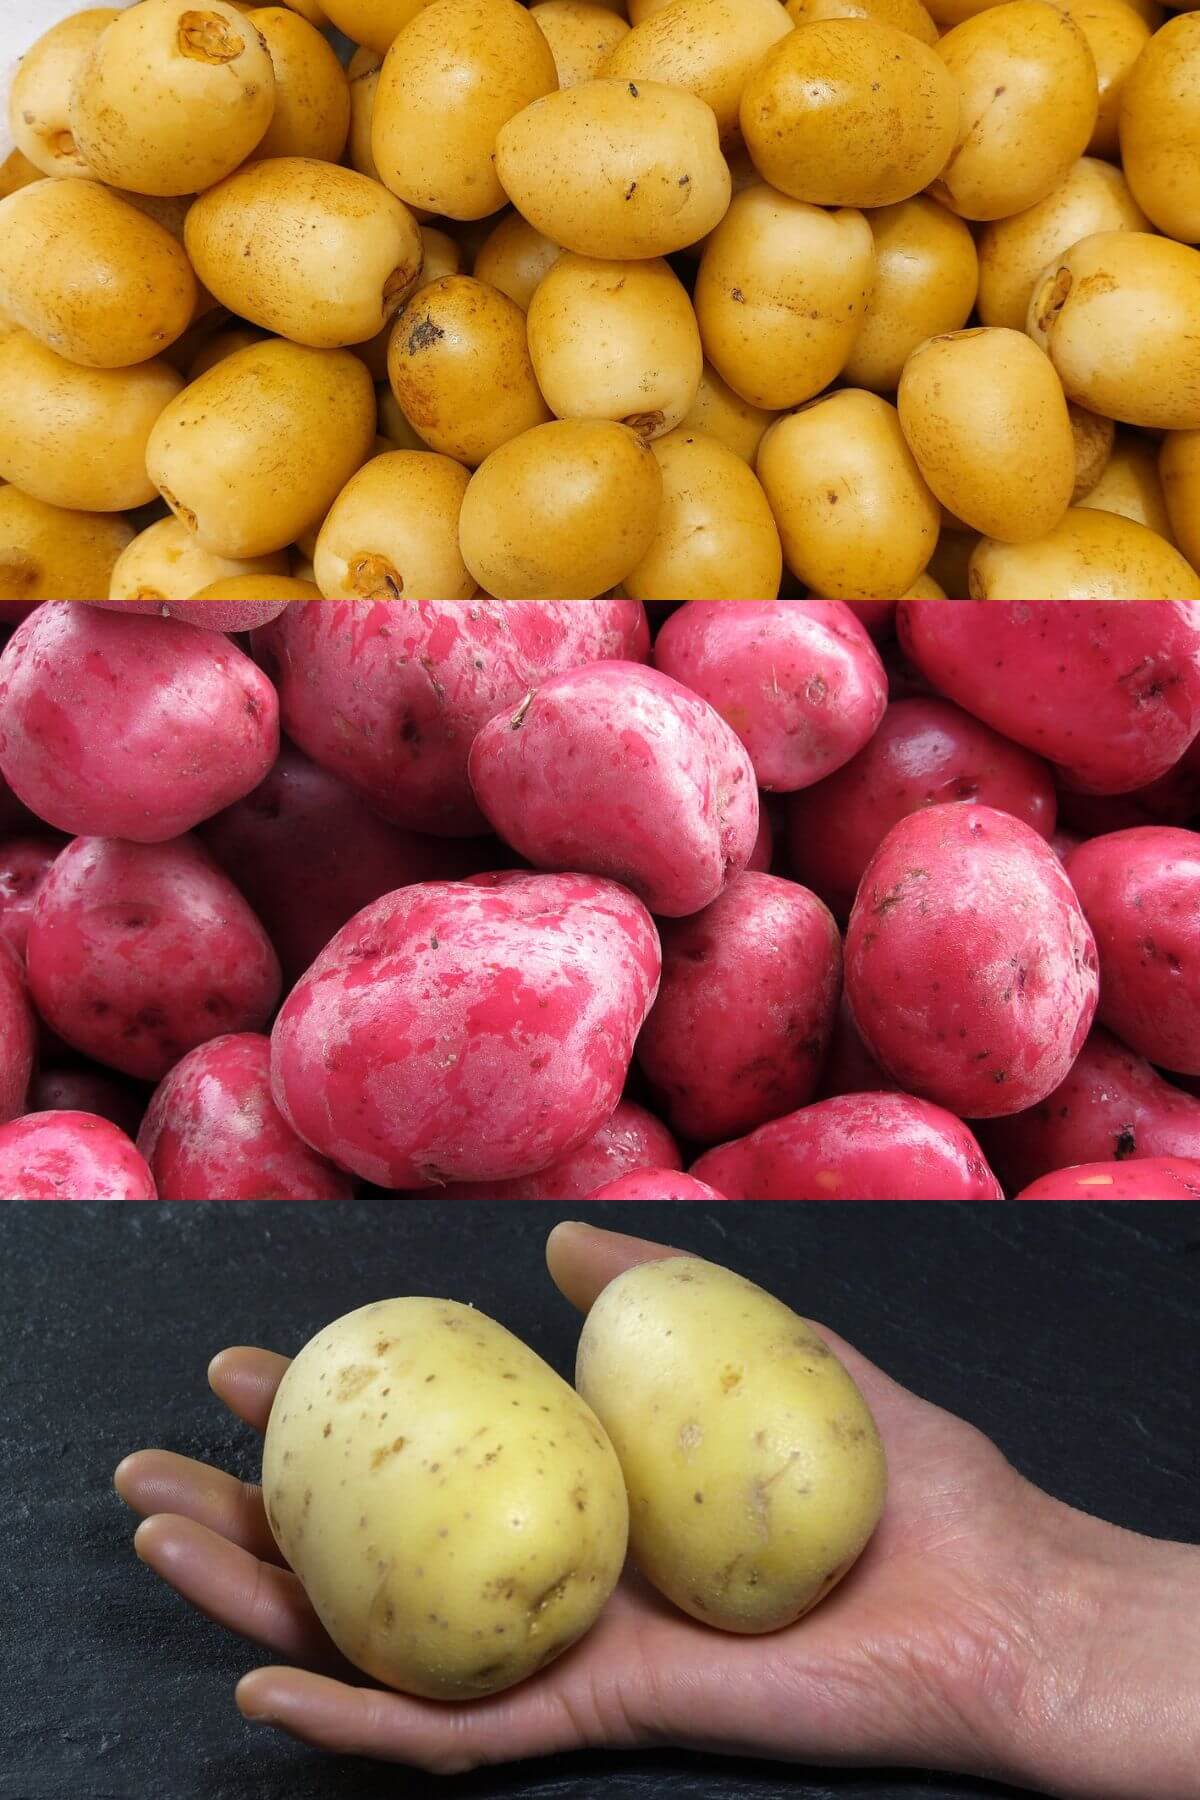 Different varieties and sizes of potatoes.